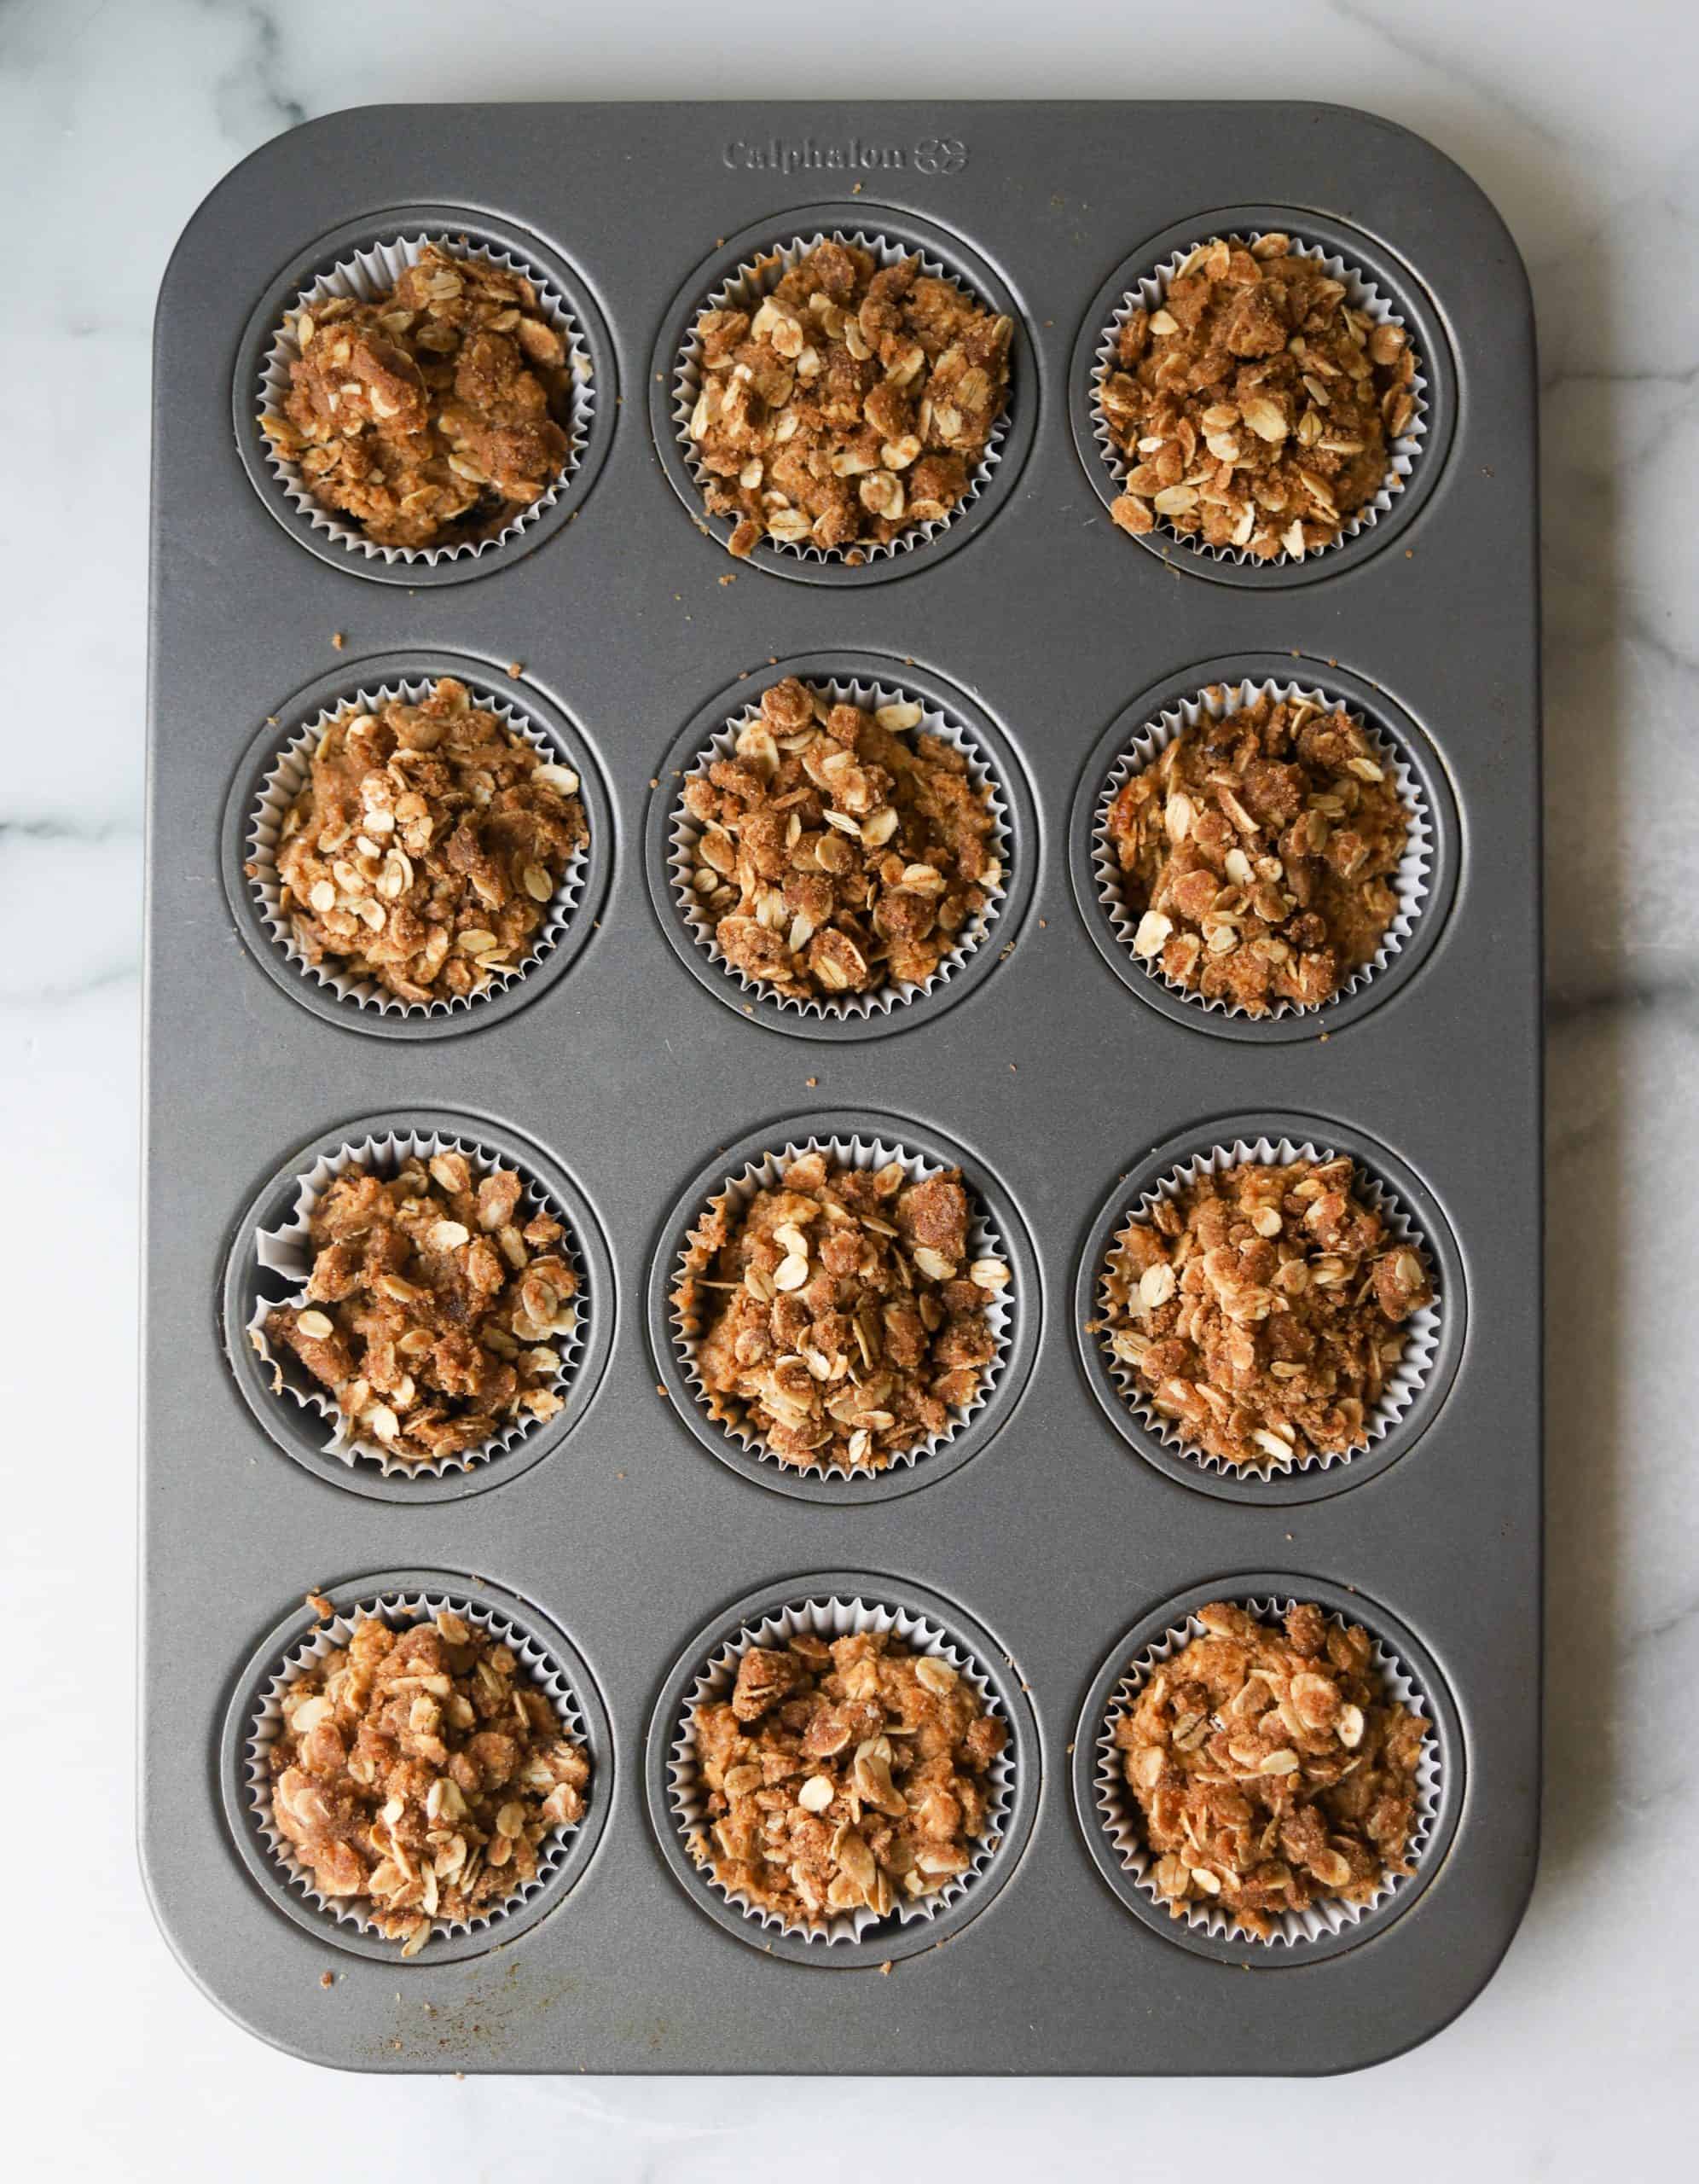 A muffin tray filled with coffee cake batter.